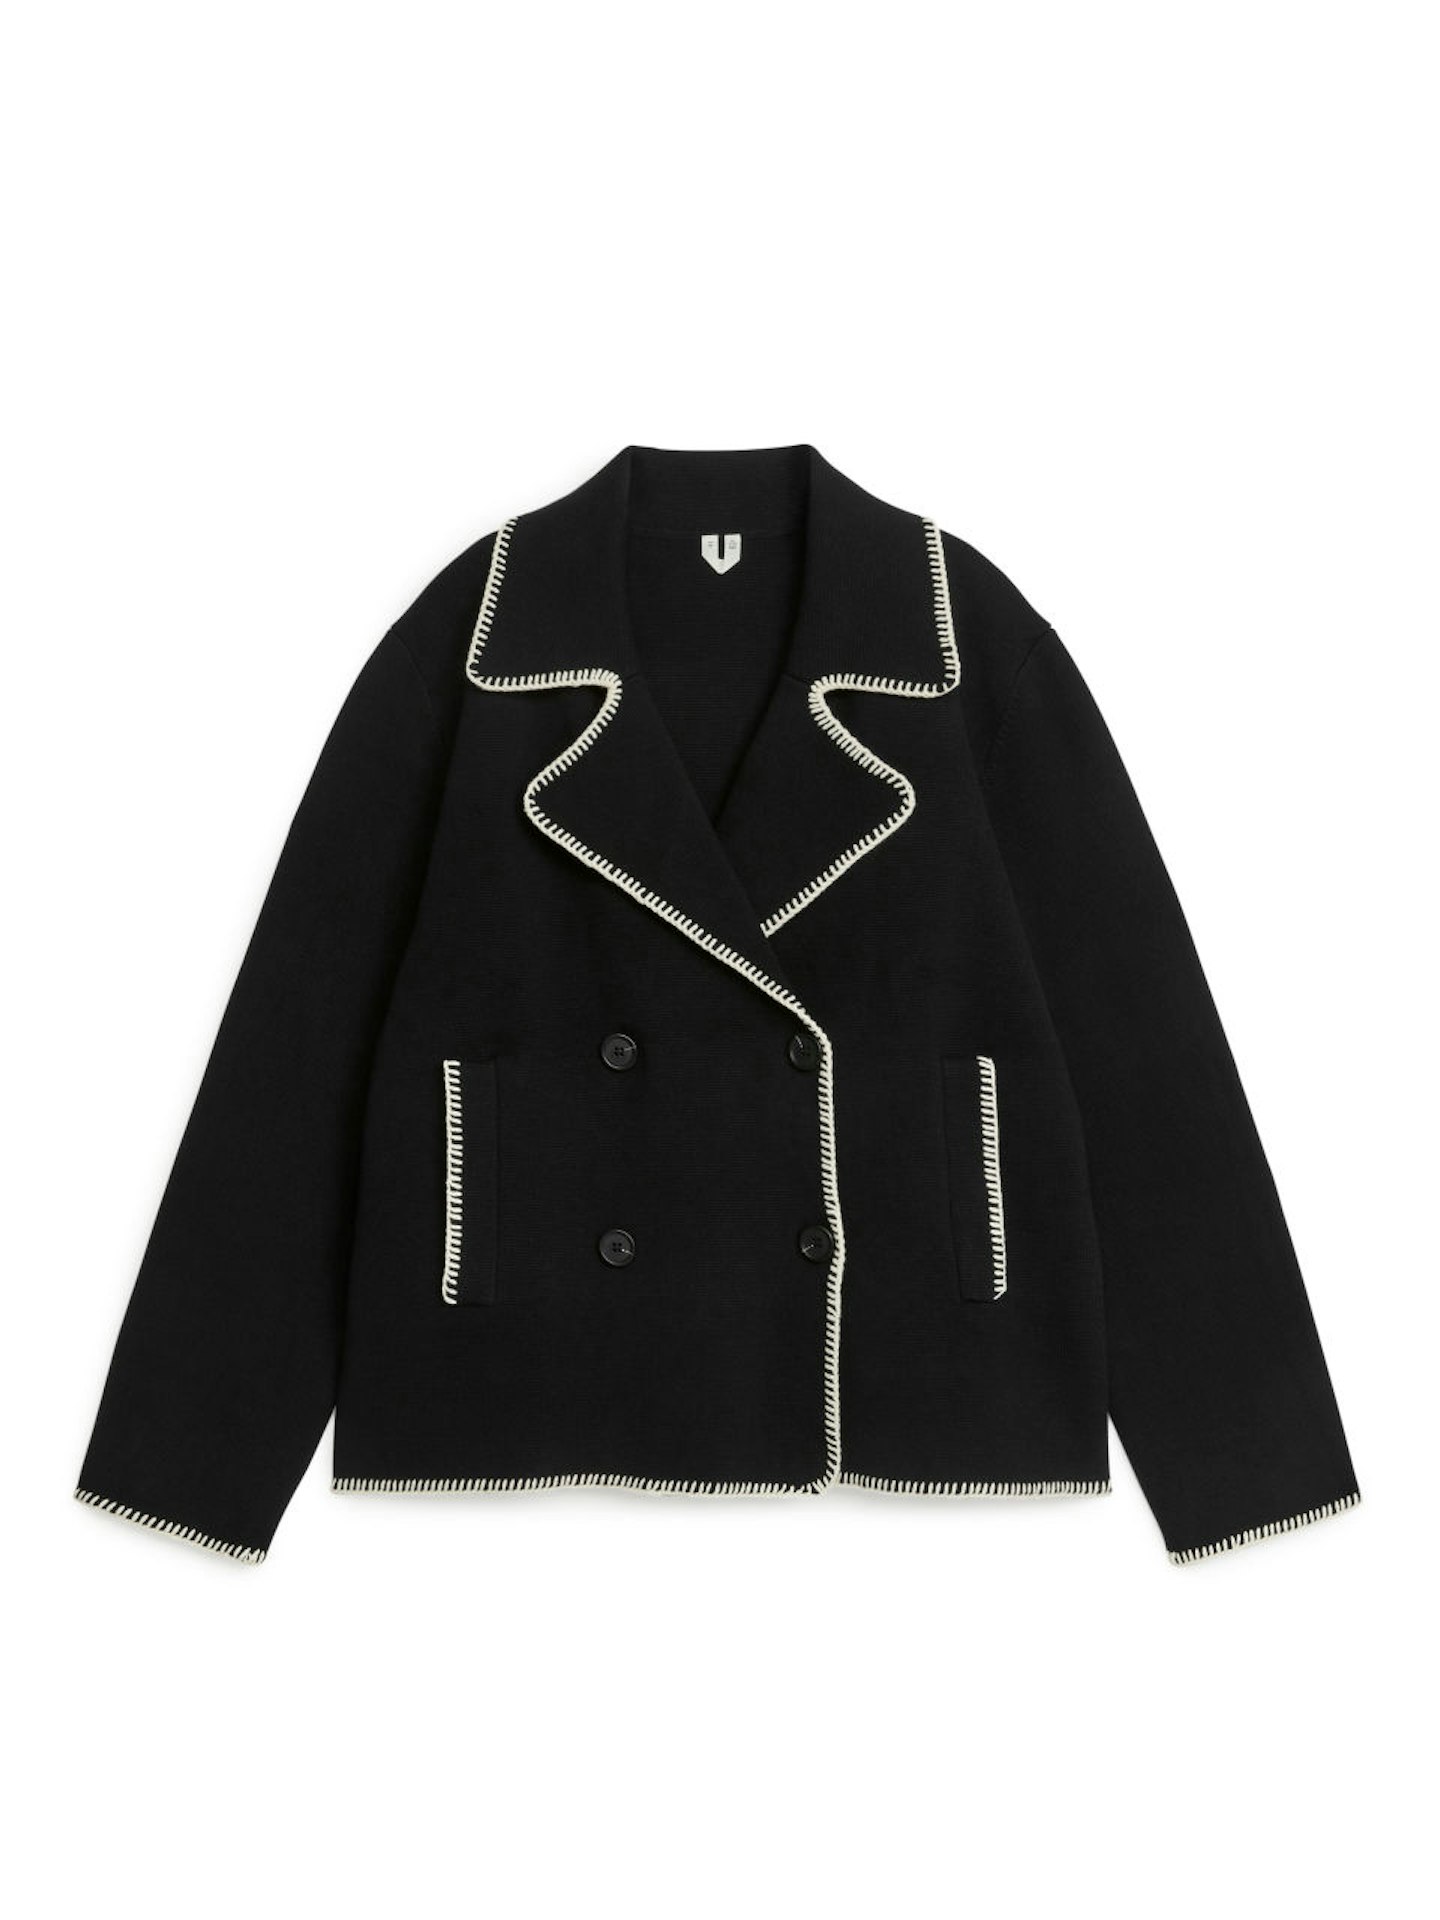 Knitted Contrast Stitching Jacket